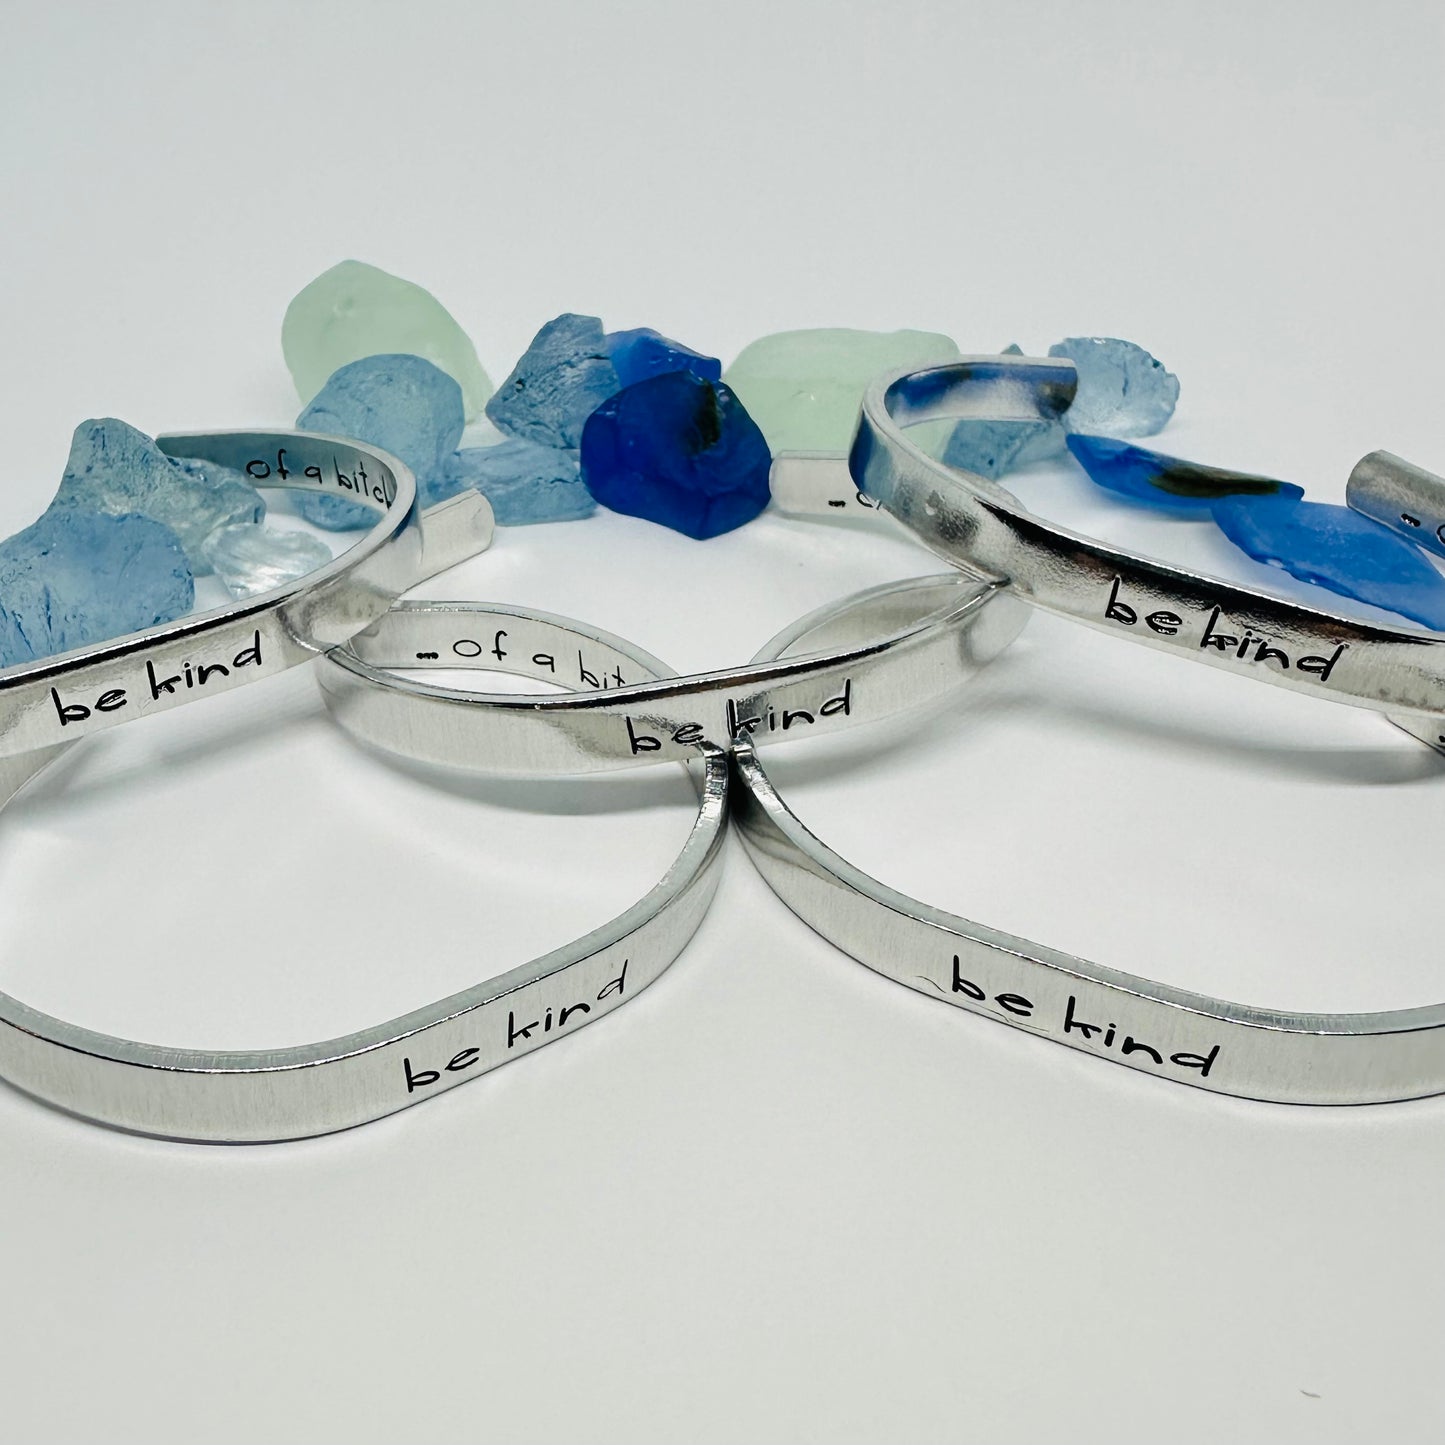 be kind ... of a bitch - Hand Stamped Double-Sided 1/4" Aluminum Cuff